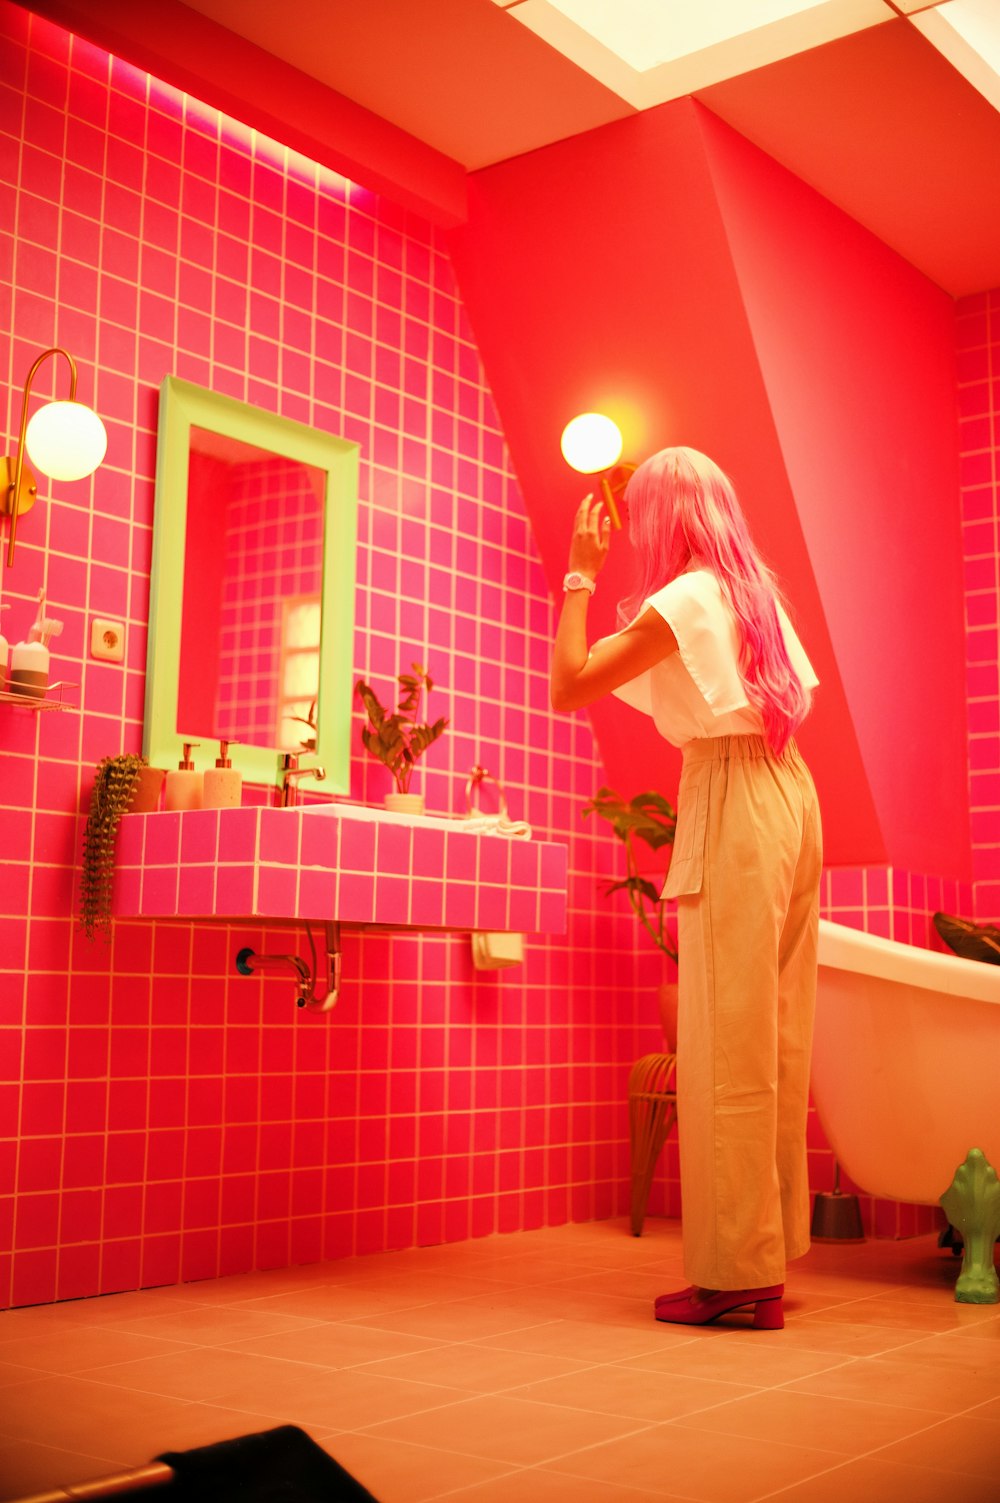 a woman with pink hair standing in a bathroom